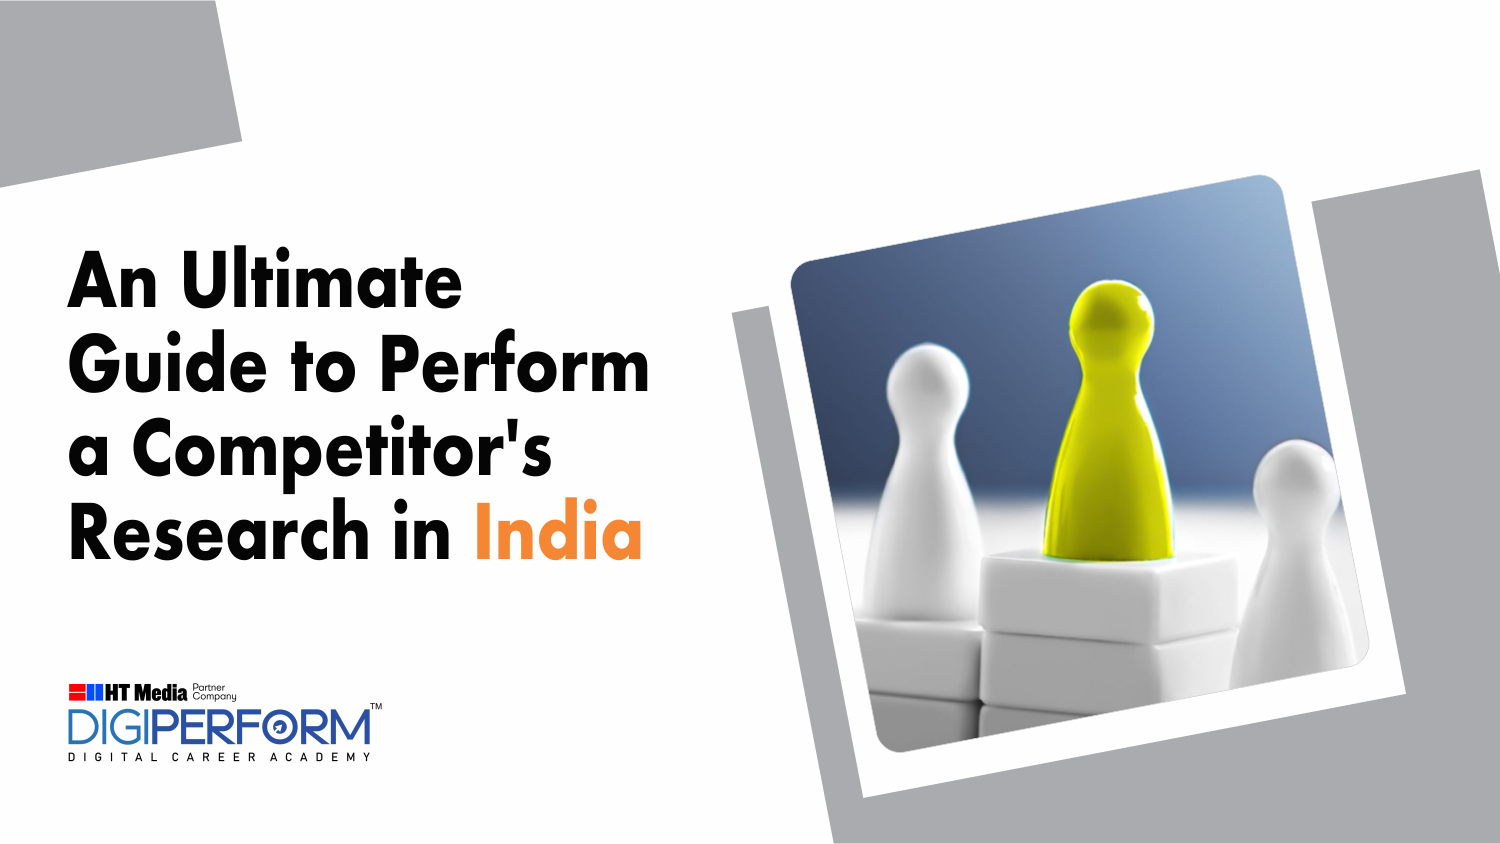 An Ultimate Guide to Perform a Competitor’s Research in India